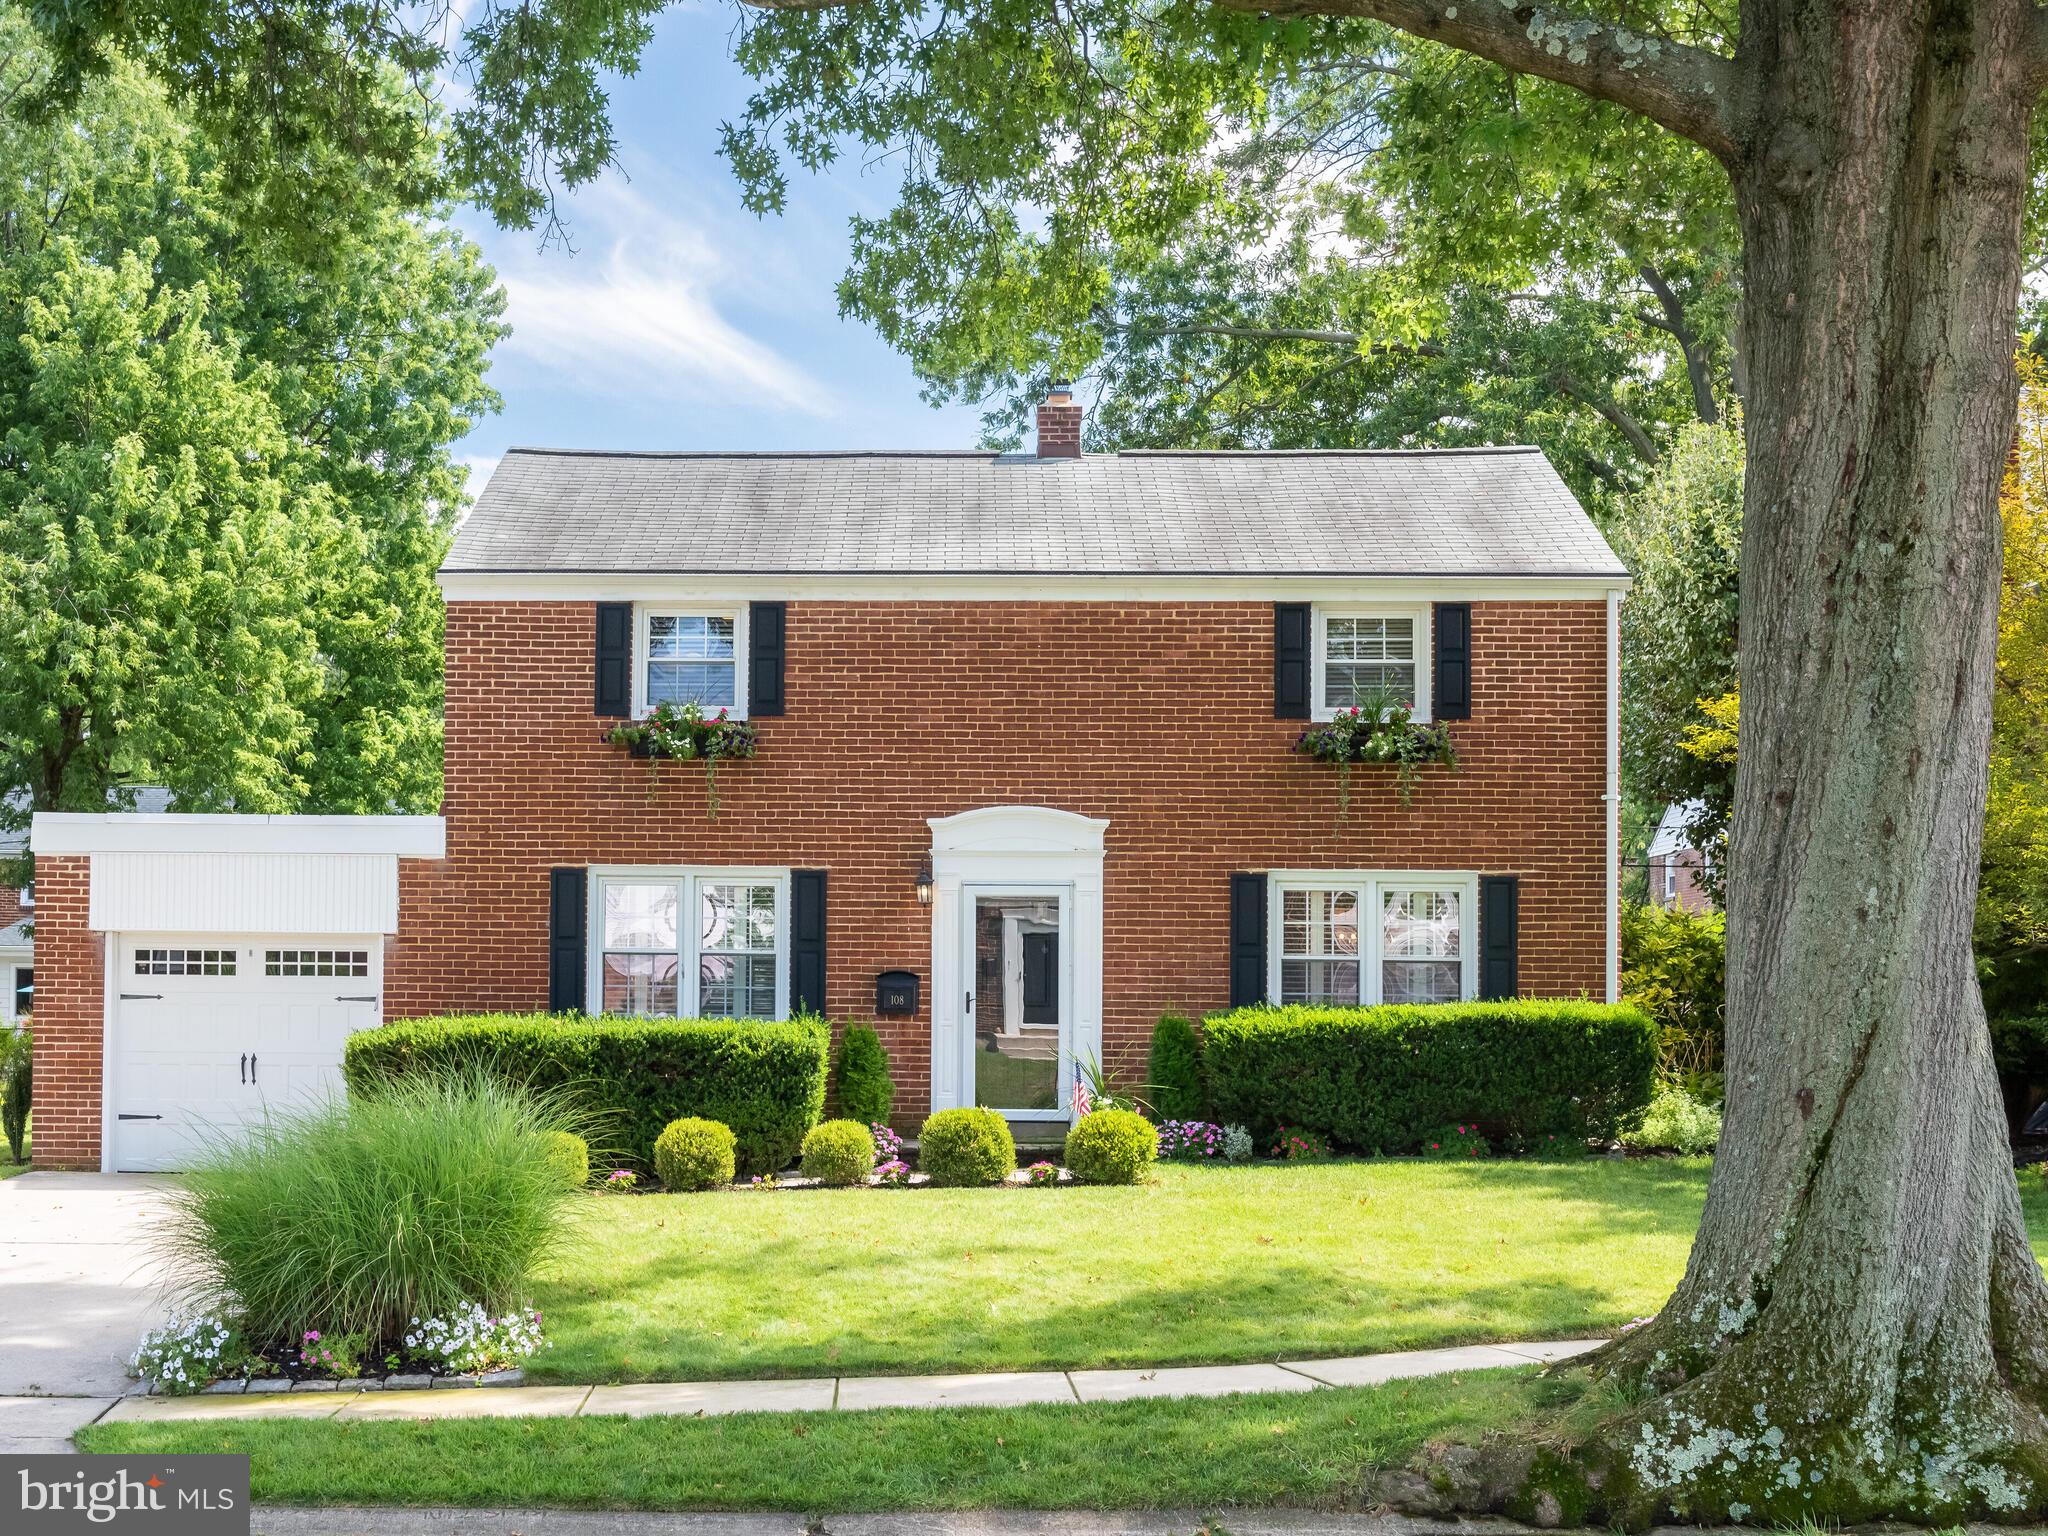 SHOWINGS START MONDAY 8/15 and not sooner!  Absolute Stunning Fairfax Colonial with quality updates 